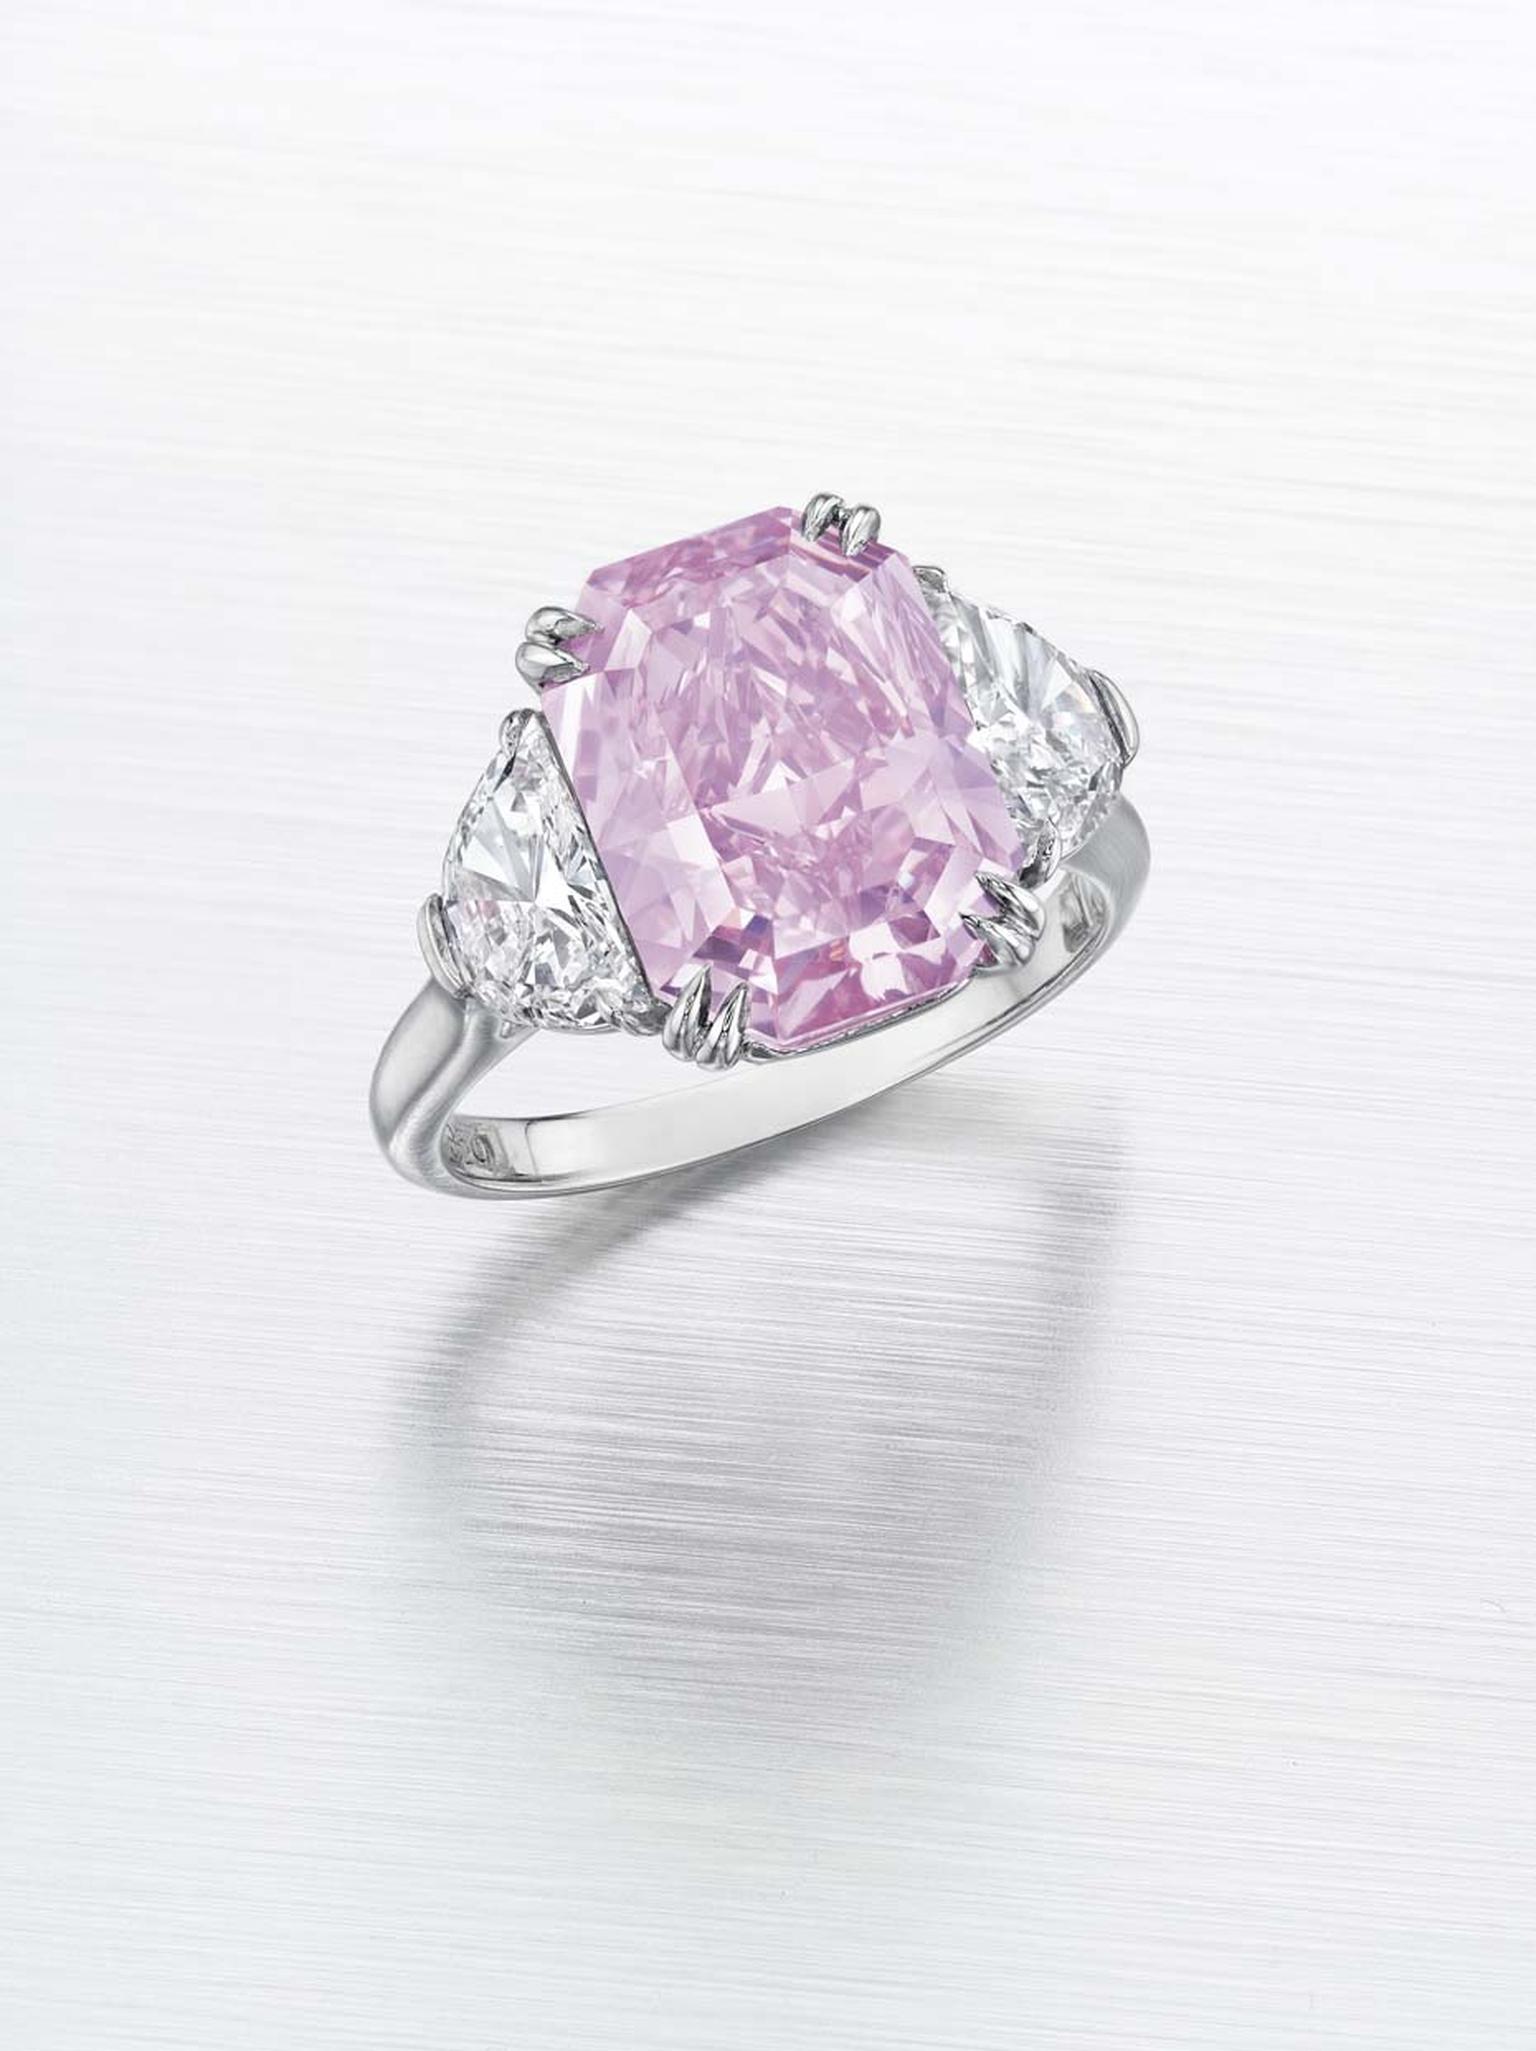 Christie's Magnificent Jewels pink diamond ring